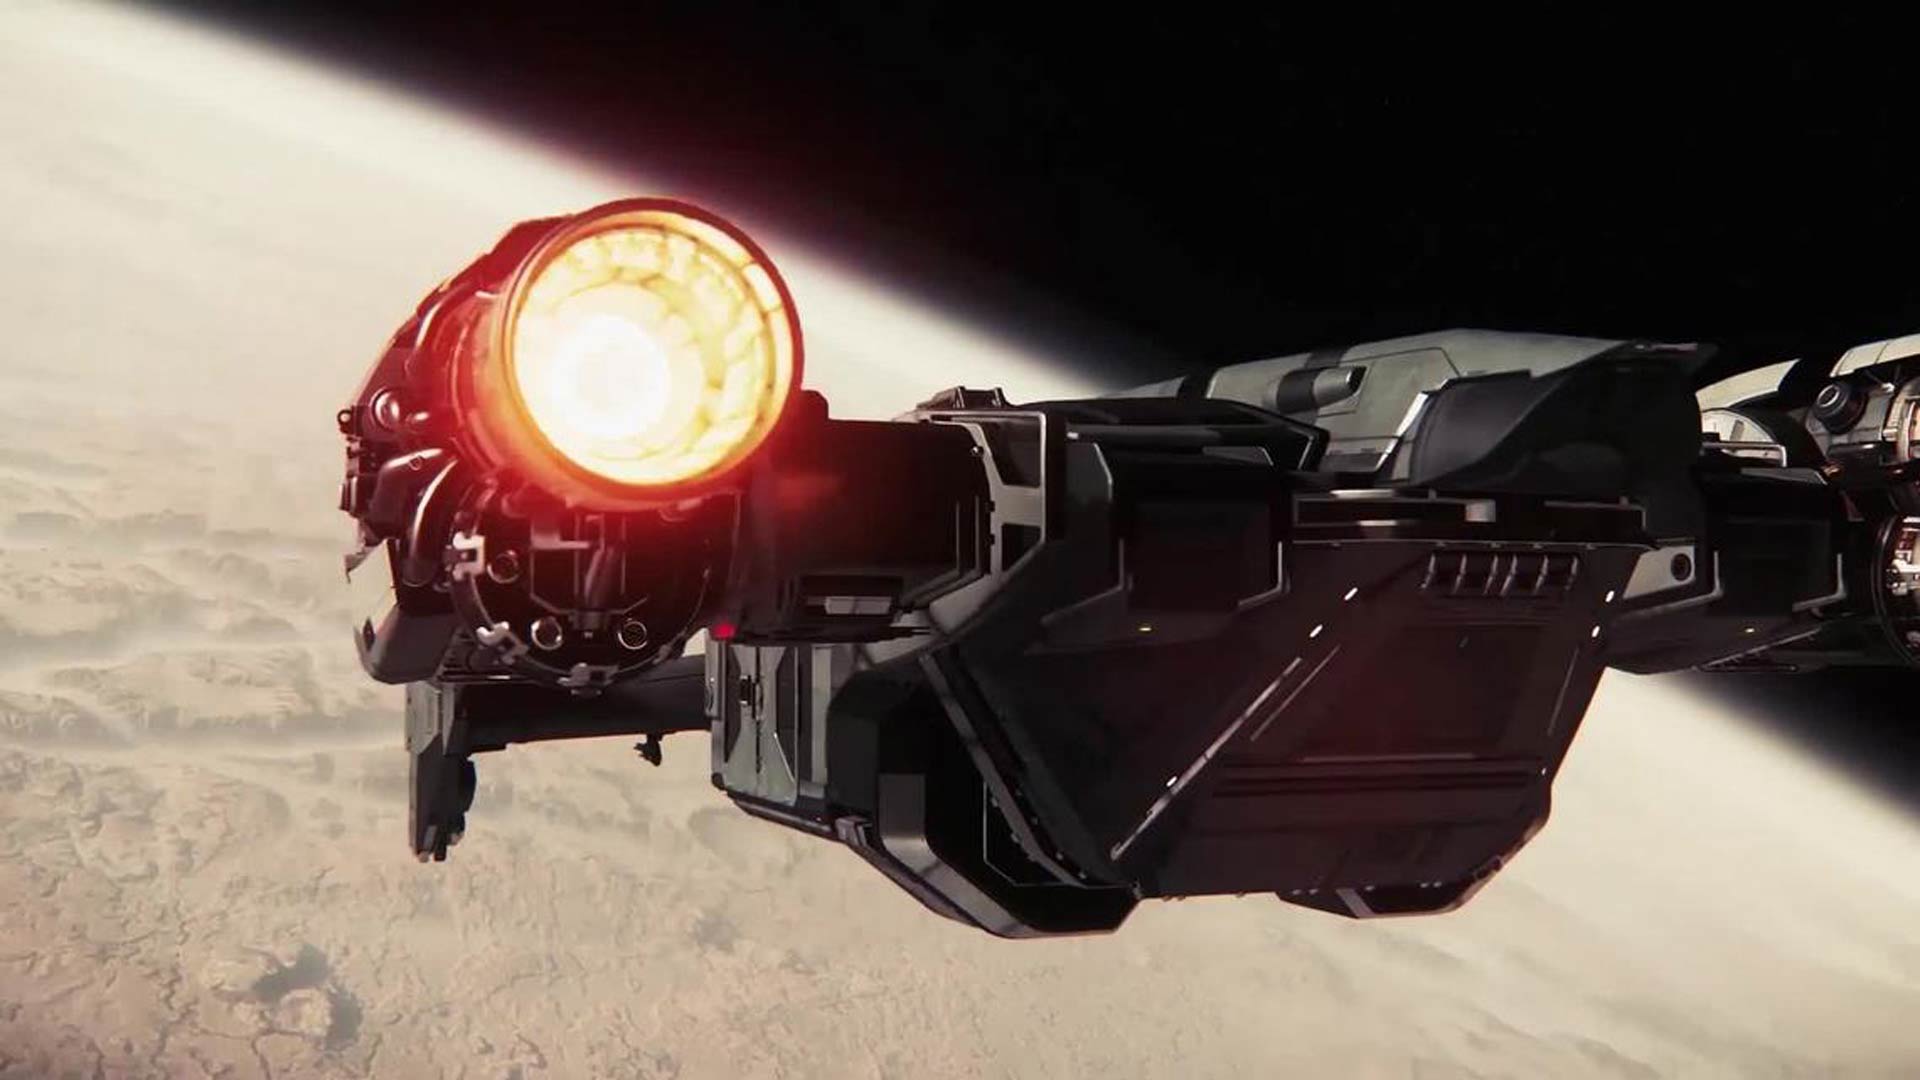 Star Citizen' Dev on VR Support: "I have no doubt we will get there" Road to VR